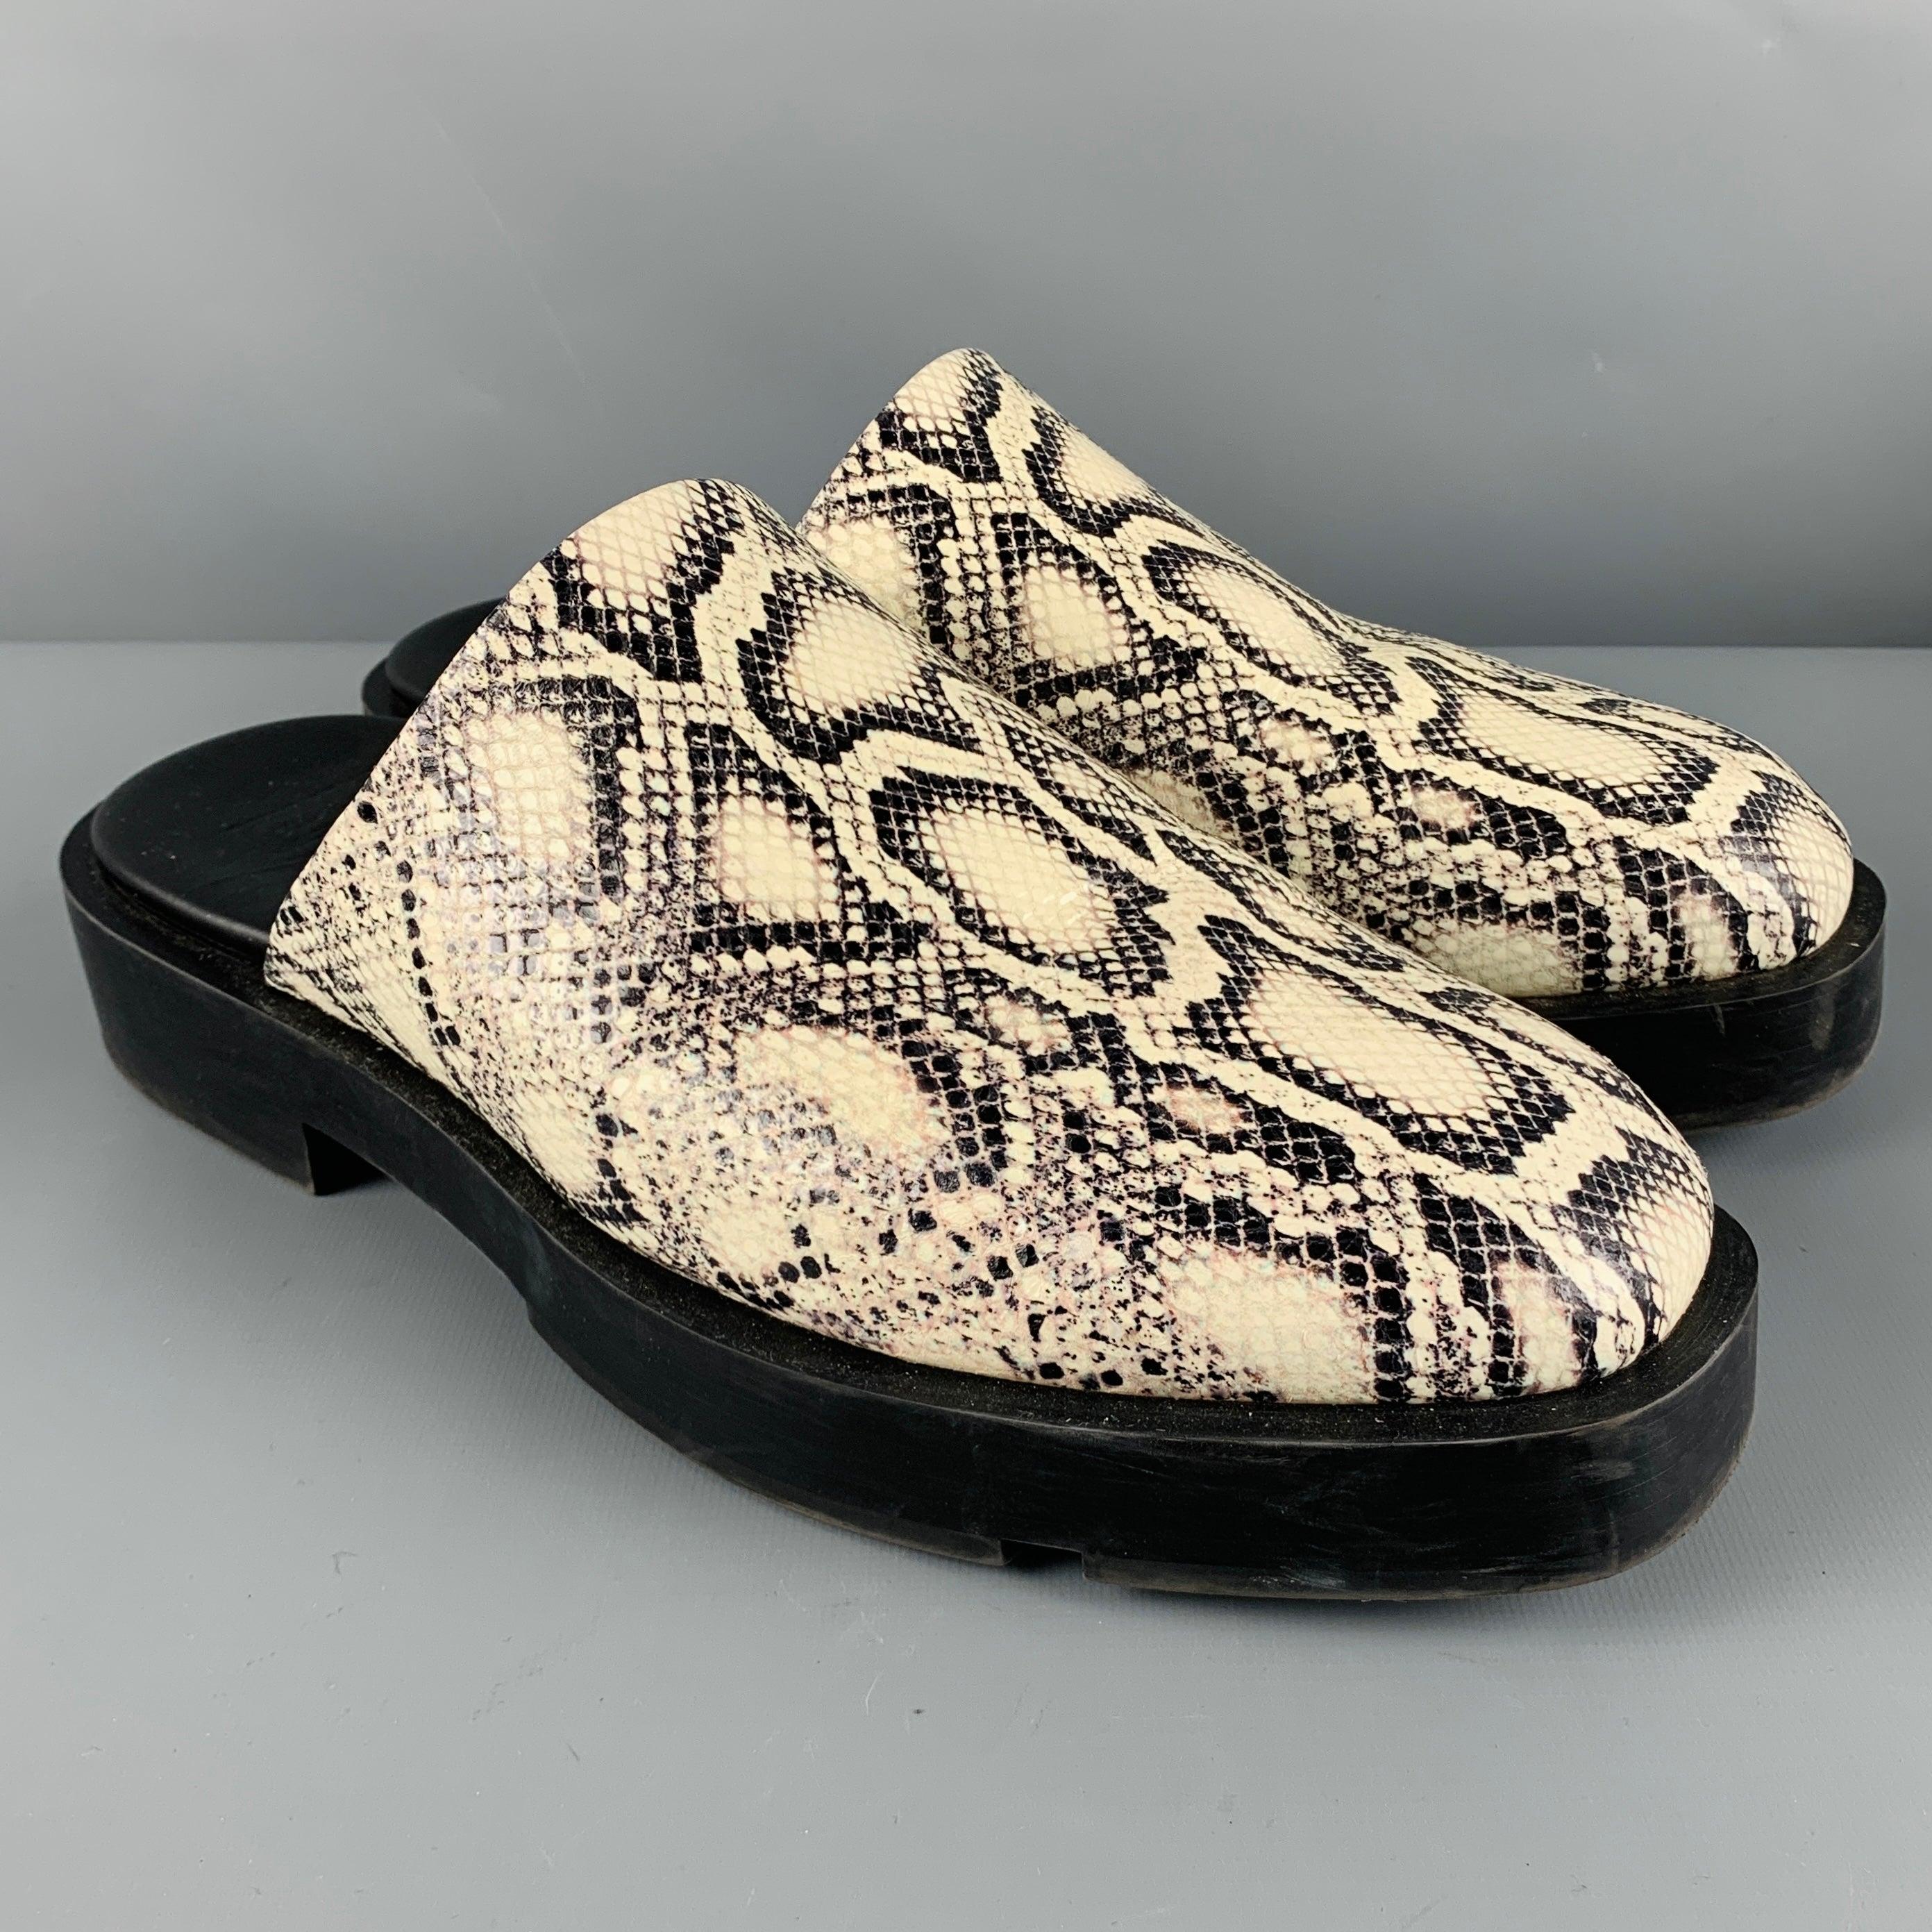 GIVENCHY loafers
in a white and black lambskin leather fabric featuring a snake print pattern, and backless slip on style. Comes with dust bag and box. Made in Italy.Excellent Pre-Owned Condition. 

Marked:   SA 0231 44 

Measurements: 
  
Outsole: